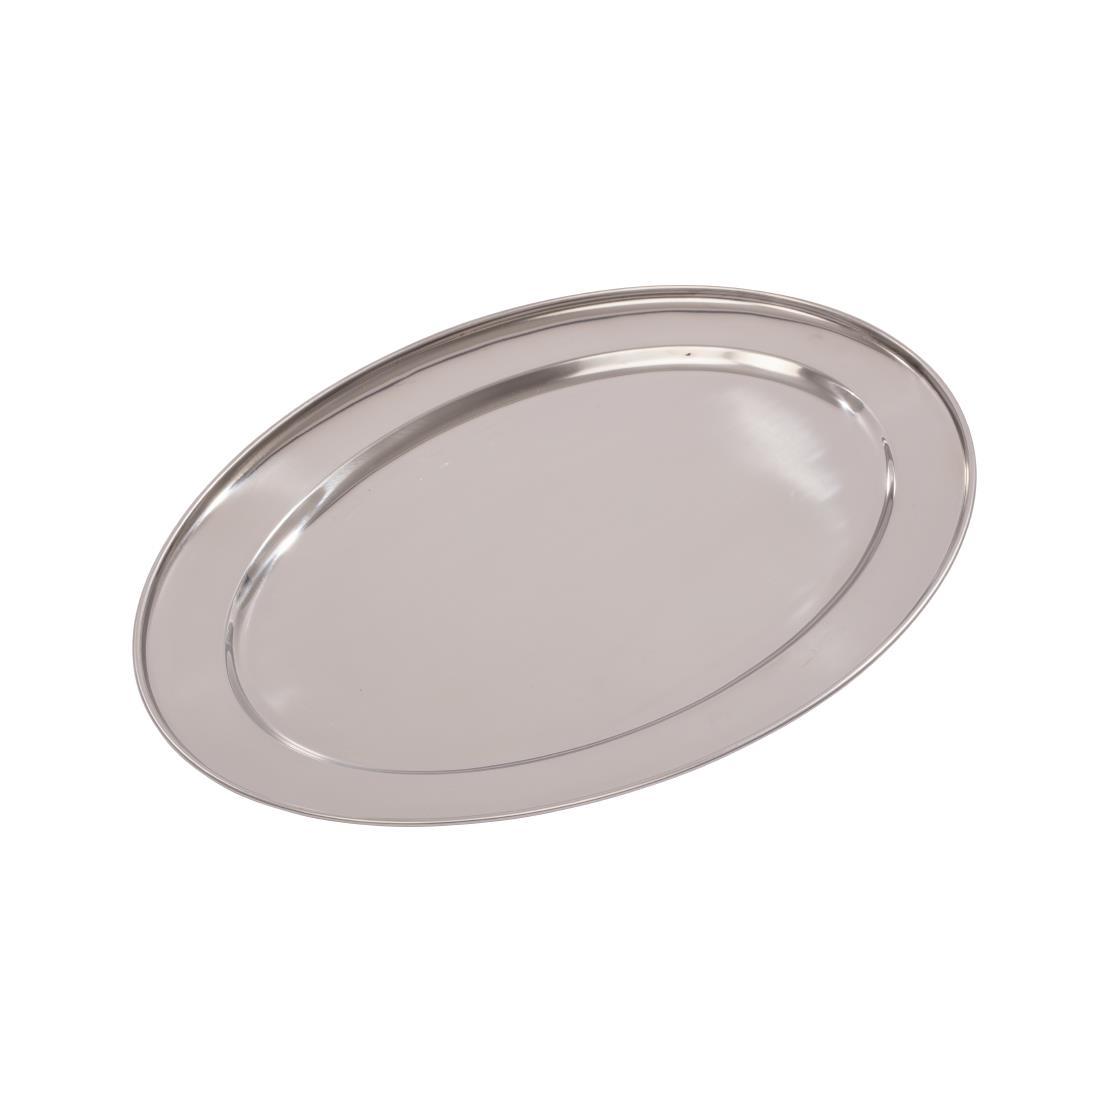 Olympia Stainless Steel Oval Serving Tray 500mm - K367  - 1